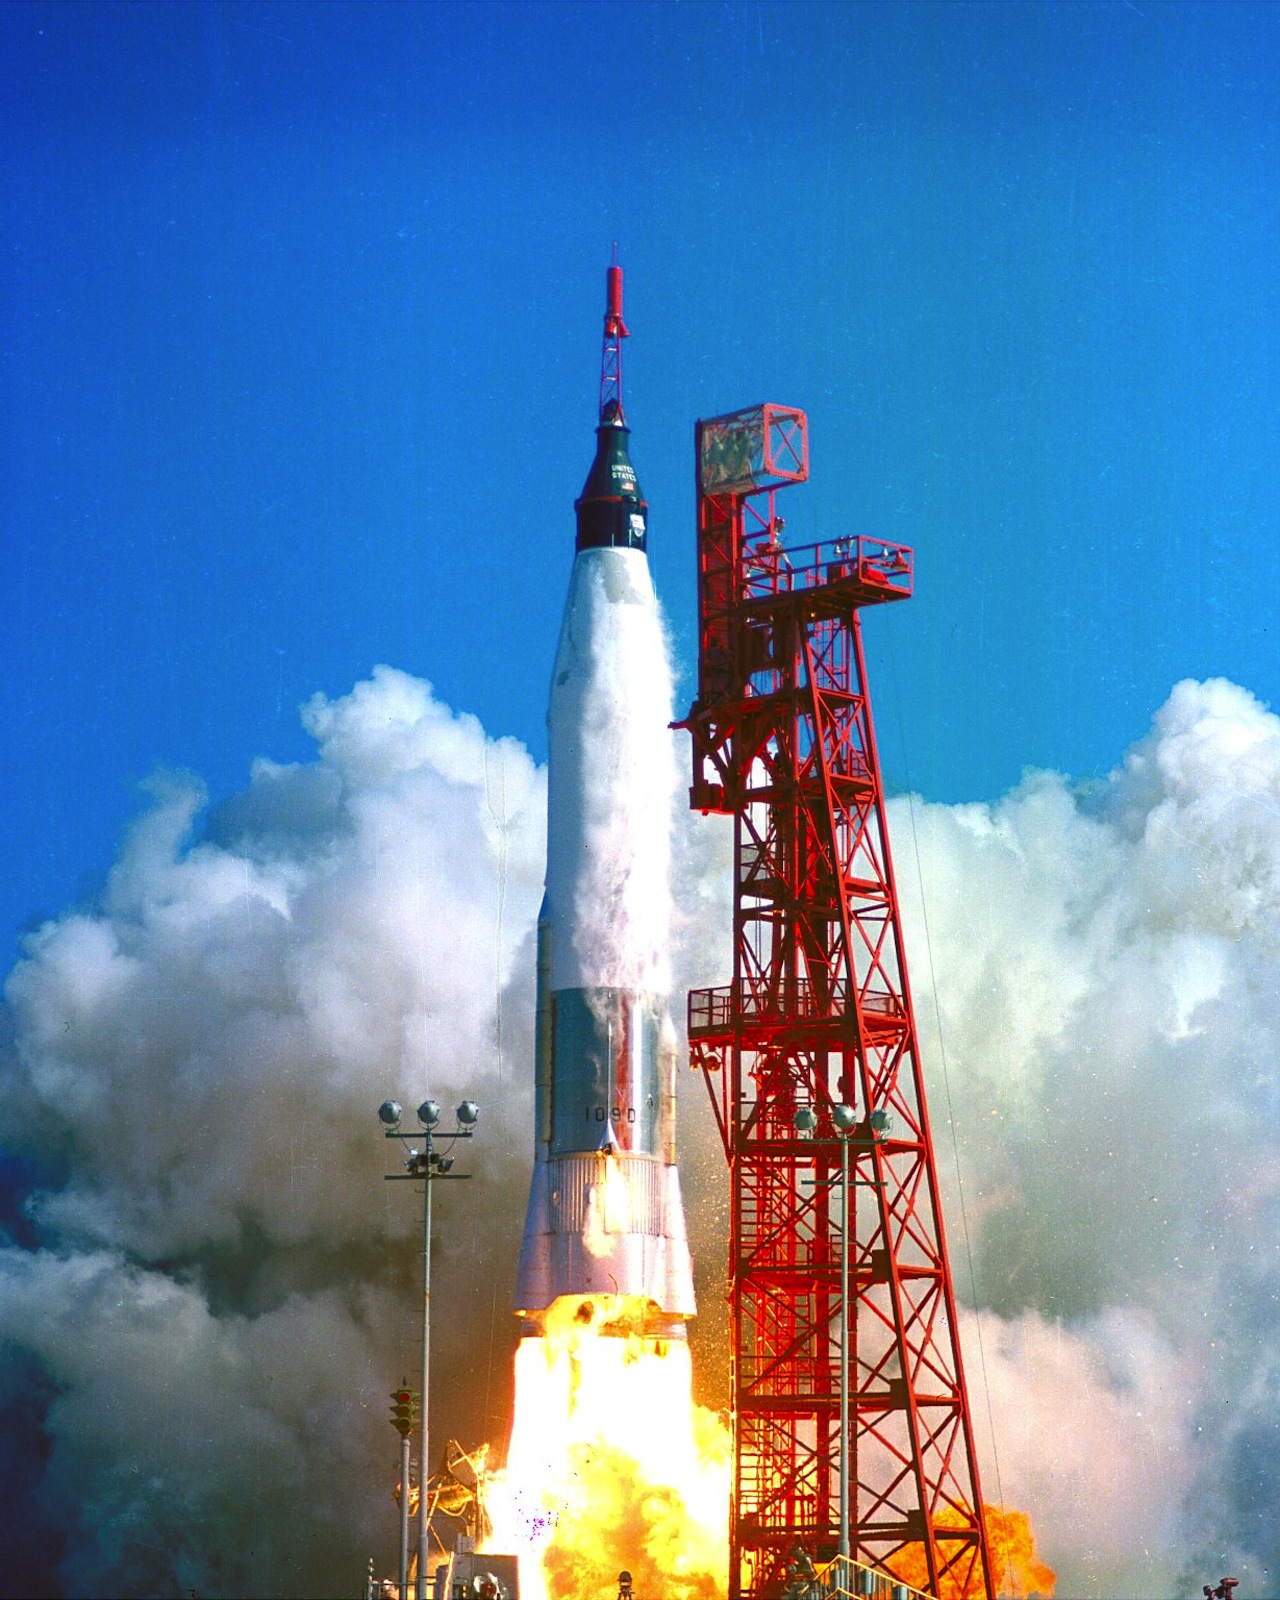 Launch of Friendship 7, the first American manned orbital space flight.  Astronaut John Glenn aboard the Mercury-Atlas rocket launches from pad 14. Photo credit: NASA